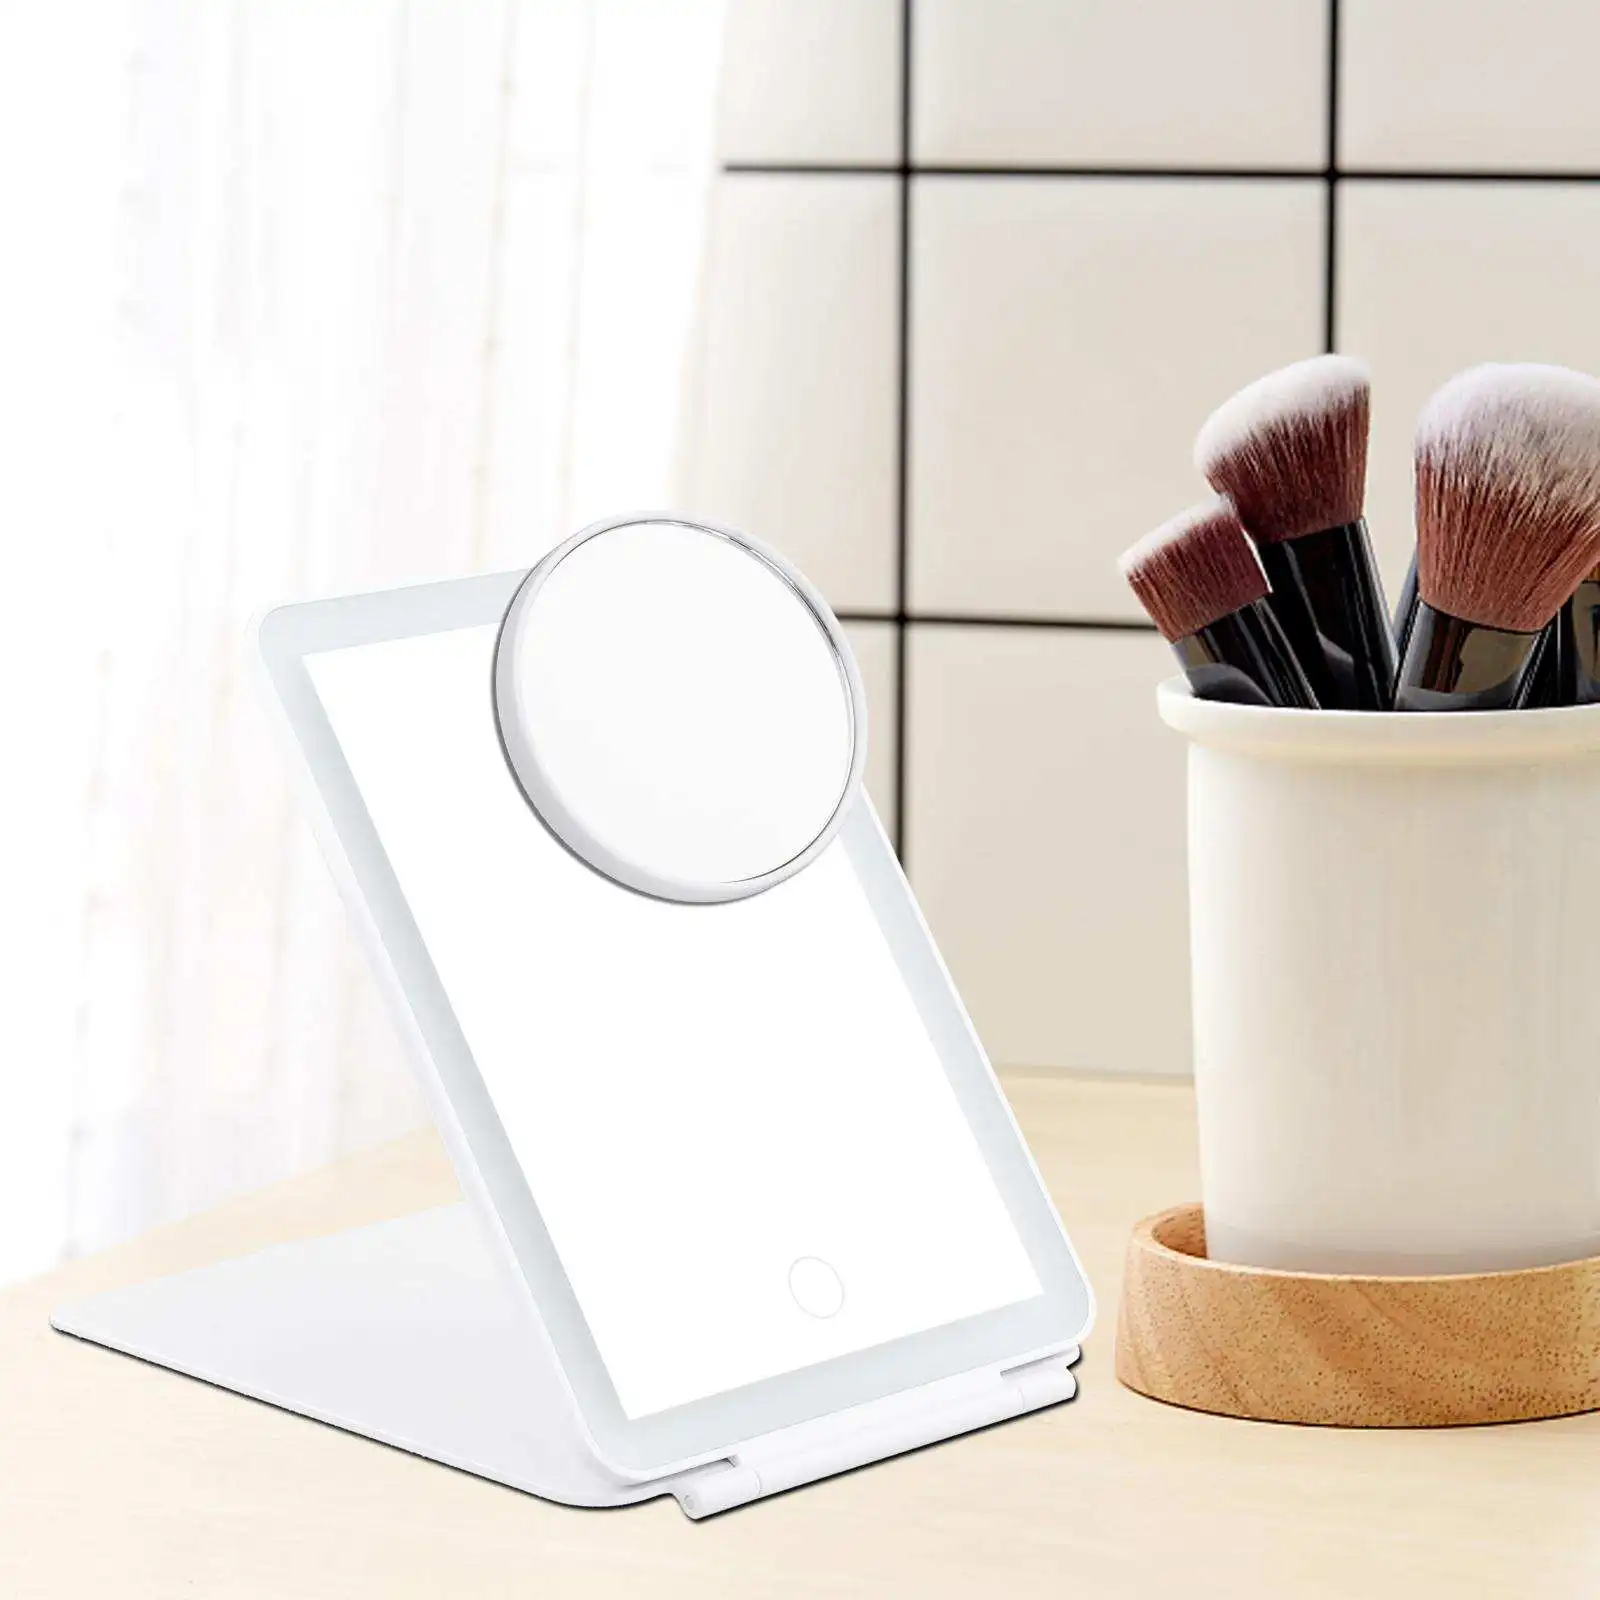 LED Makeup Mirror 10x Magnifying Touch Screen Dimming USB Rechargeable Portable Dimmable Gift Women Travel Home Cosmetic